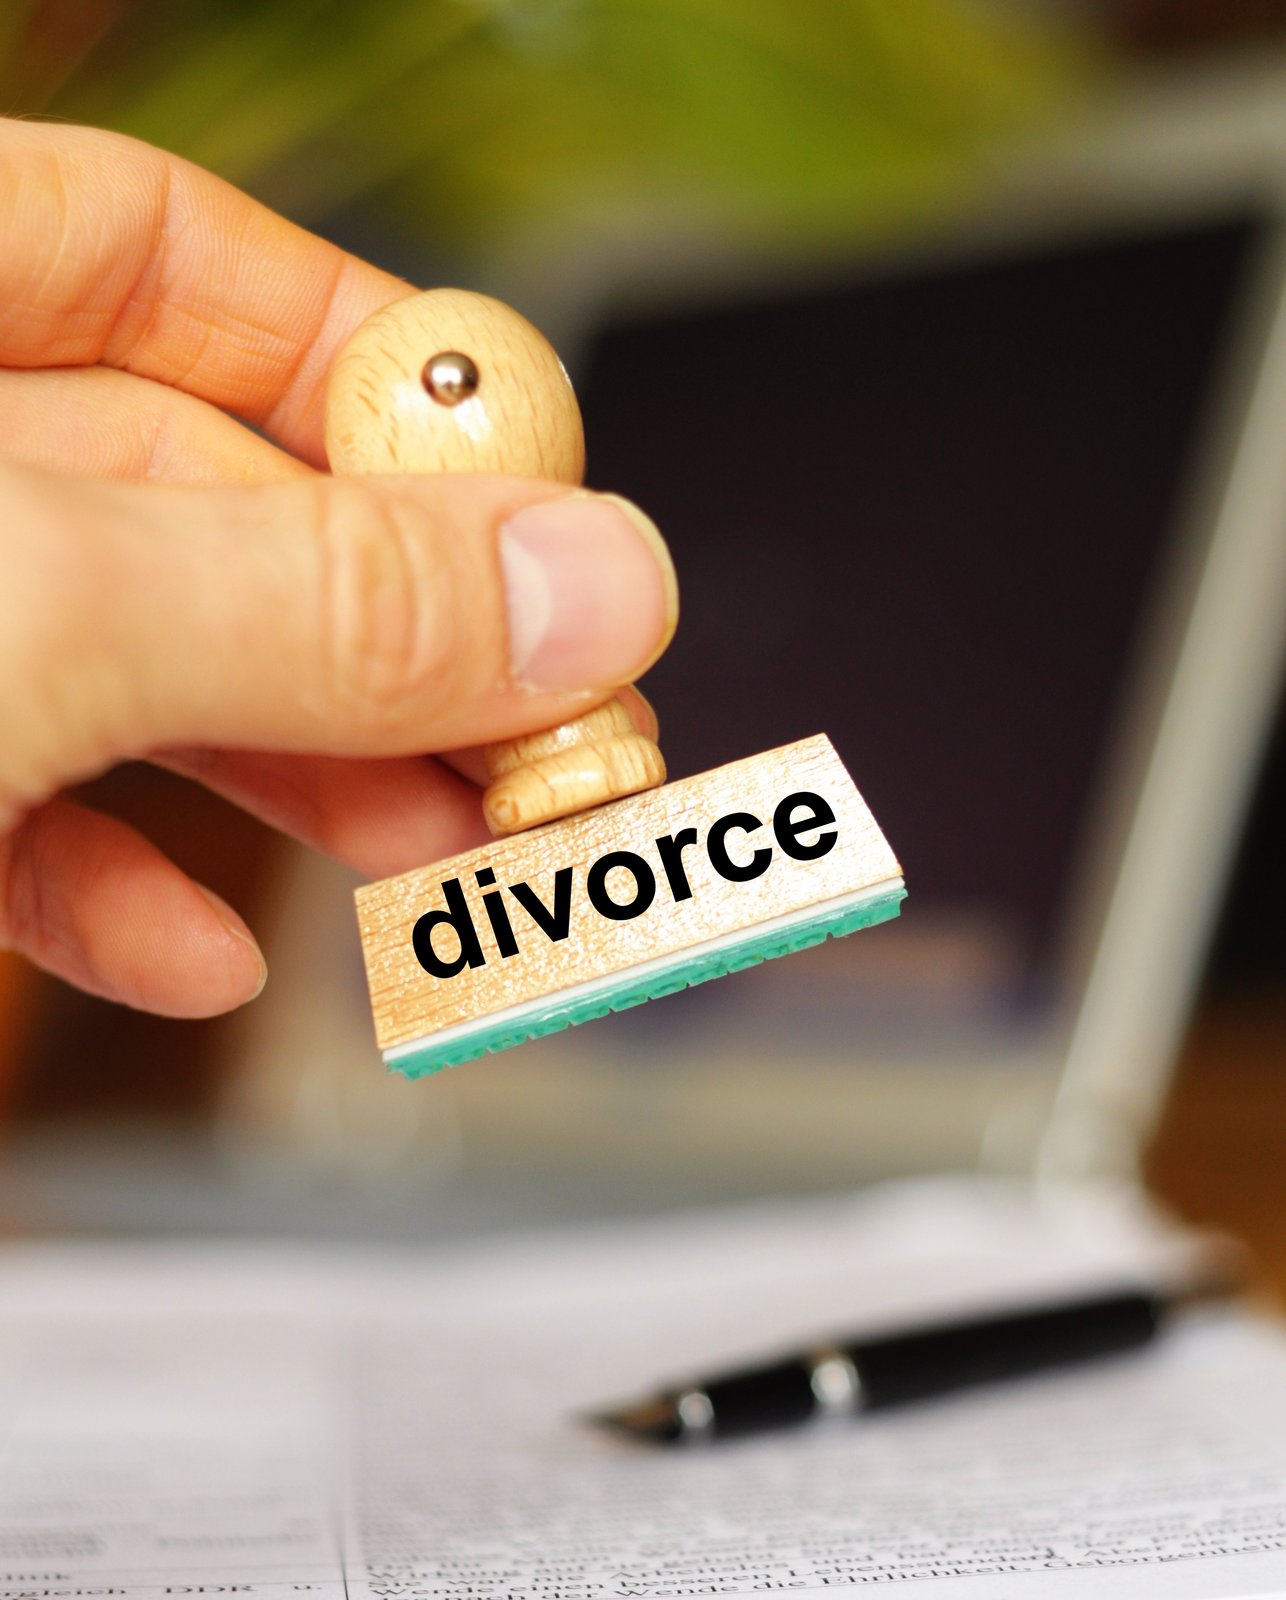 As the women are getting more independent, the divorce rate in India is also increasing.